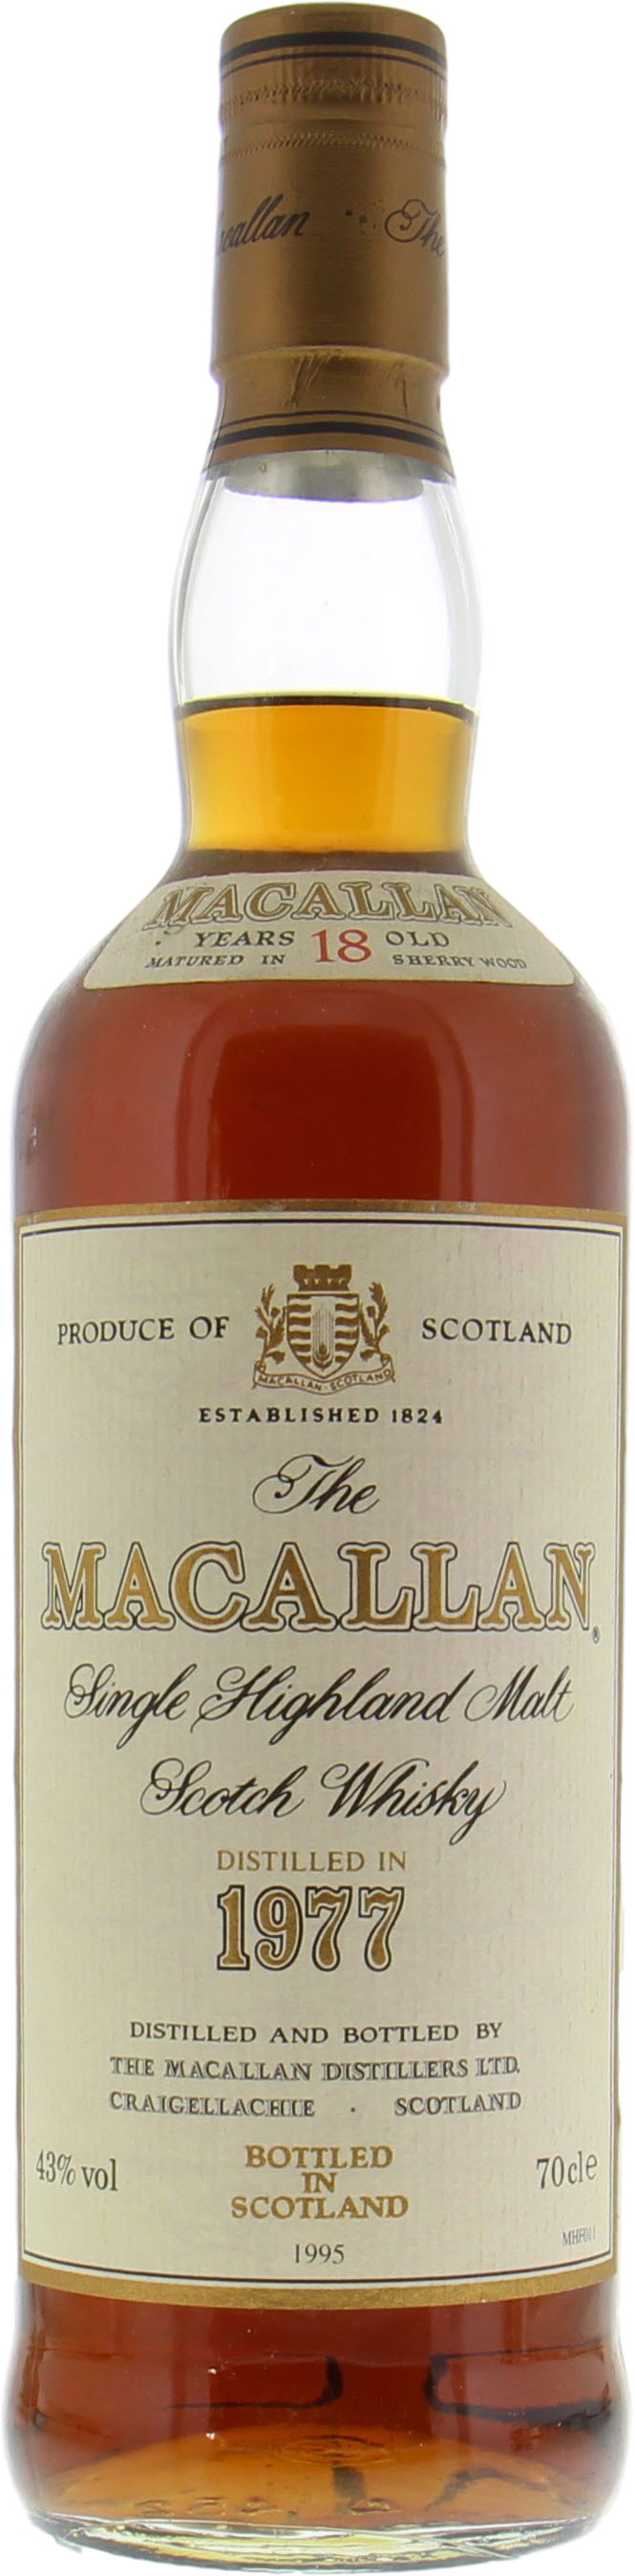 Macallan - 1977 Vintage 18 Years Old Sherry Cask 43% 1977